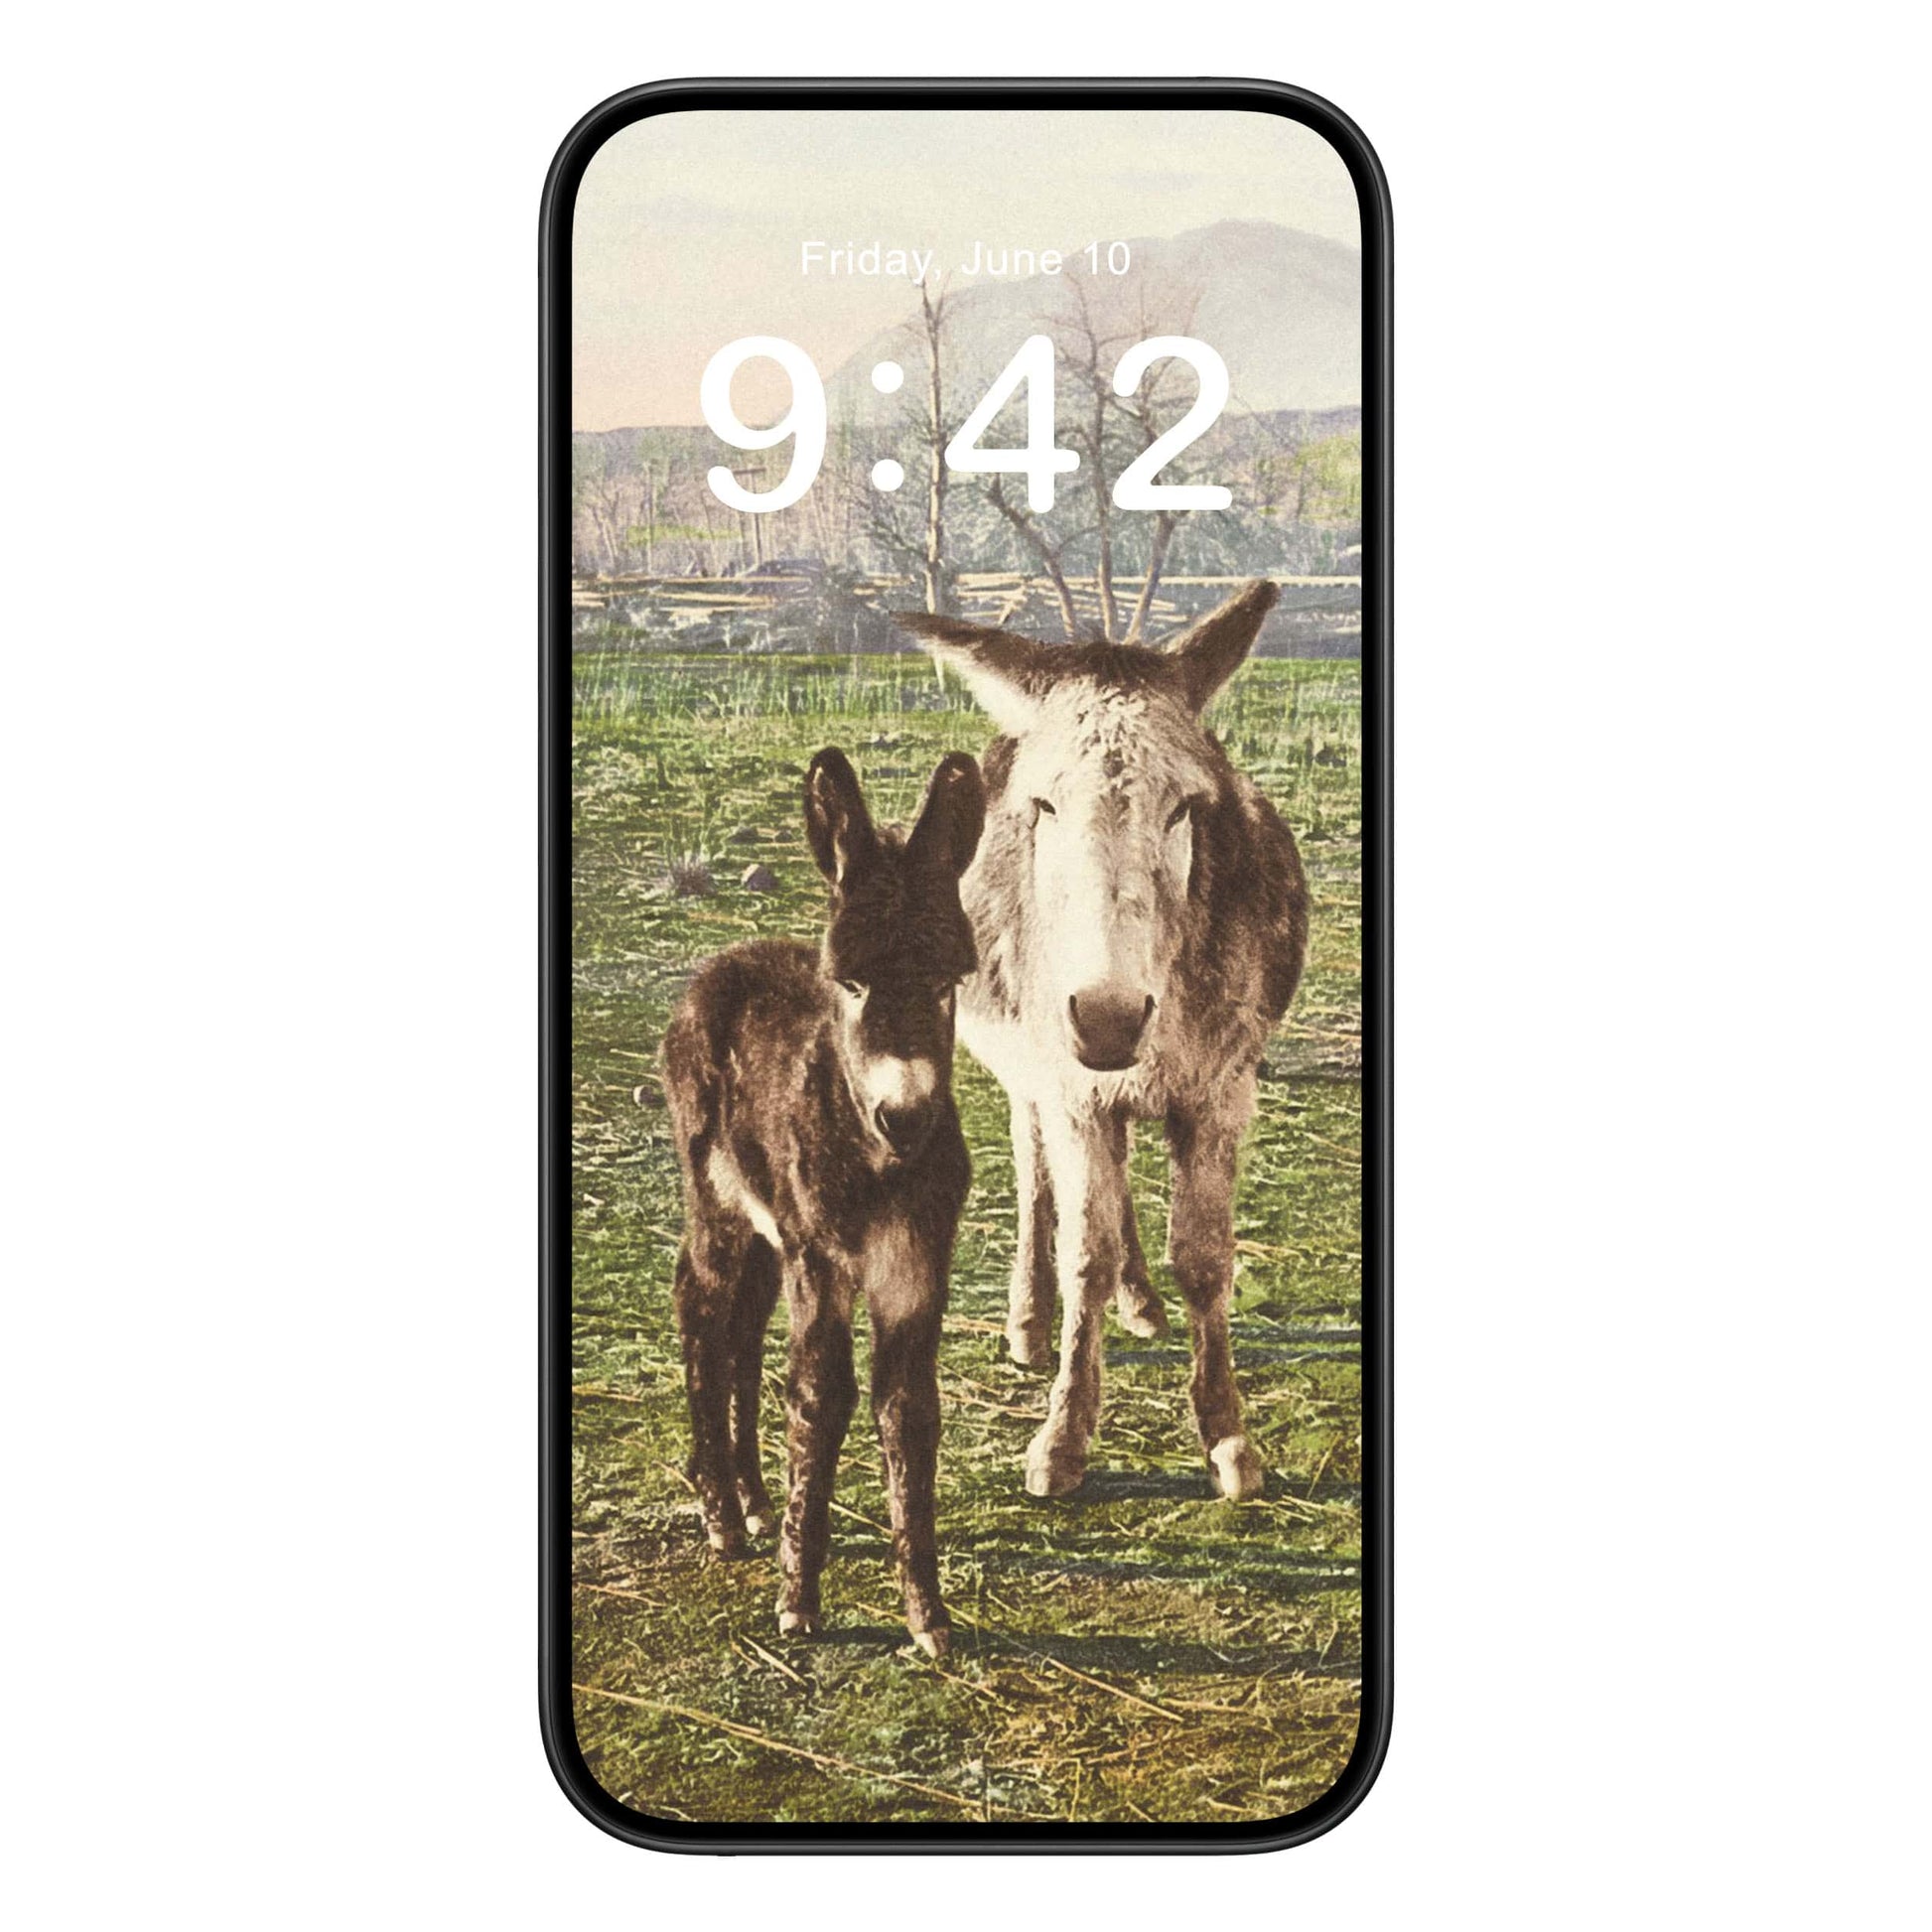 Funny Animal phone wallpaper background with two donkey's design shown on a phone lock screen, instant download available.